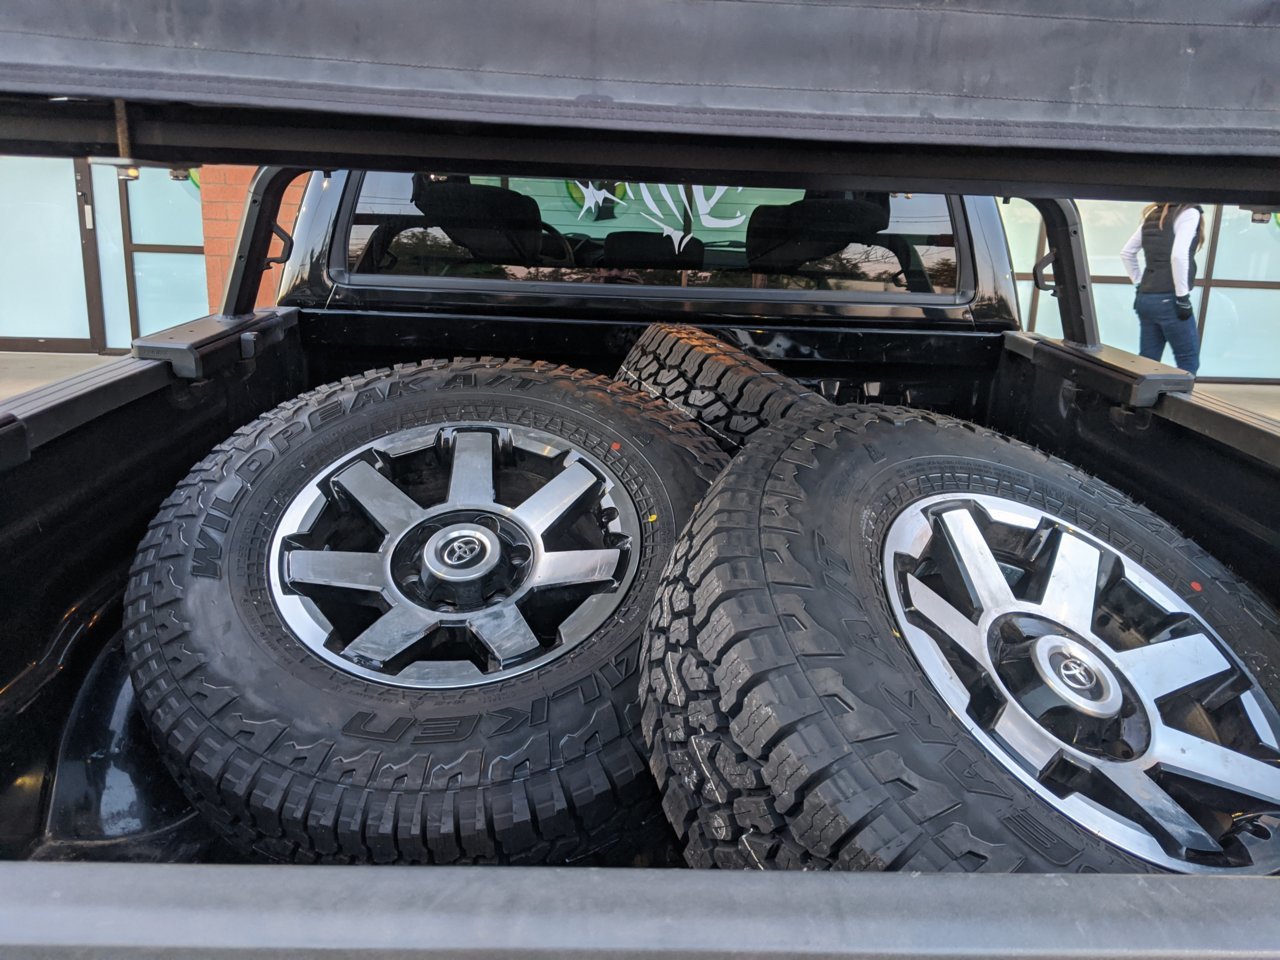 new tires in truck bed.jpg